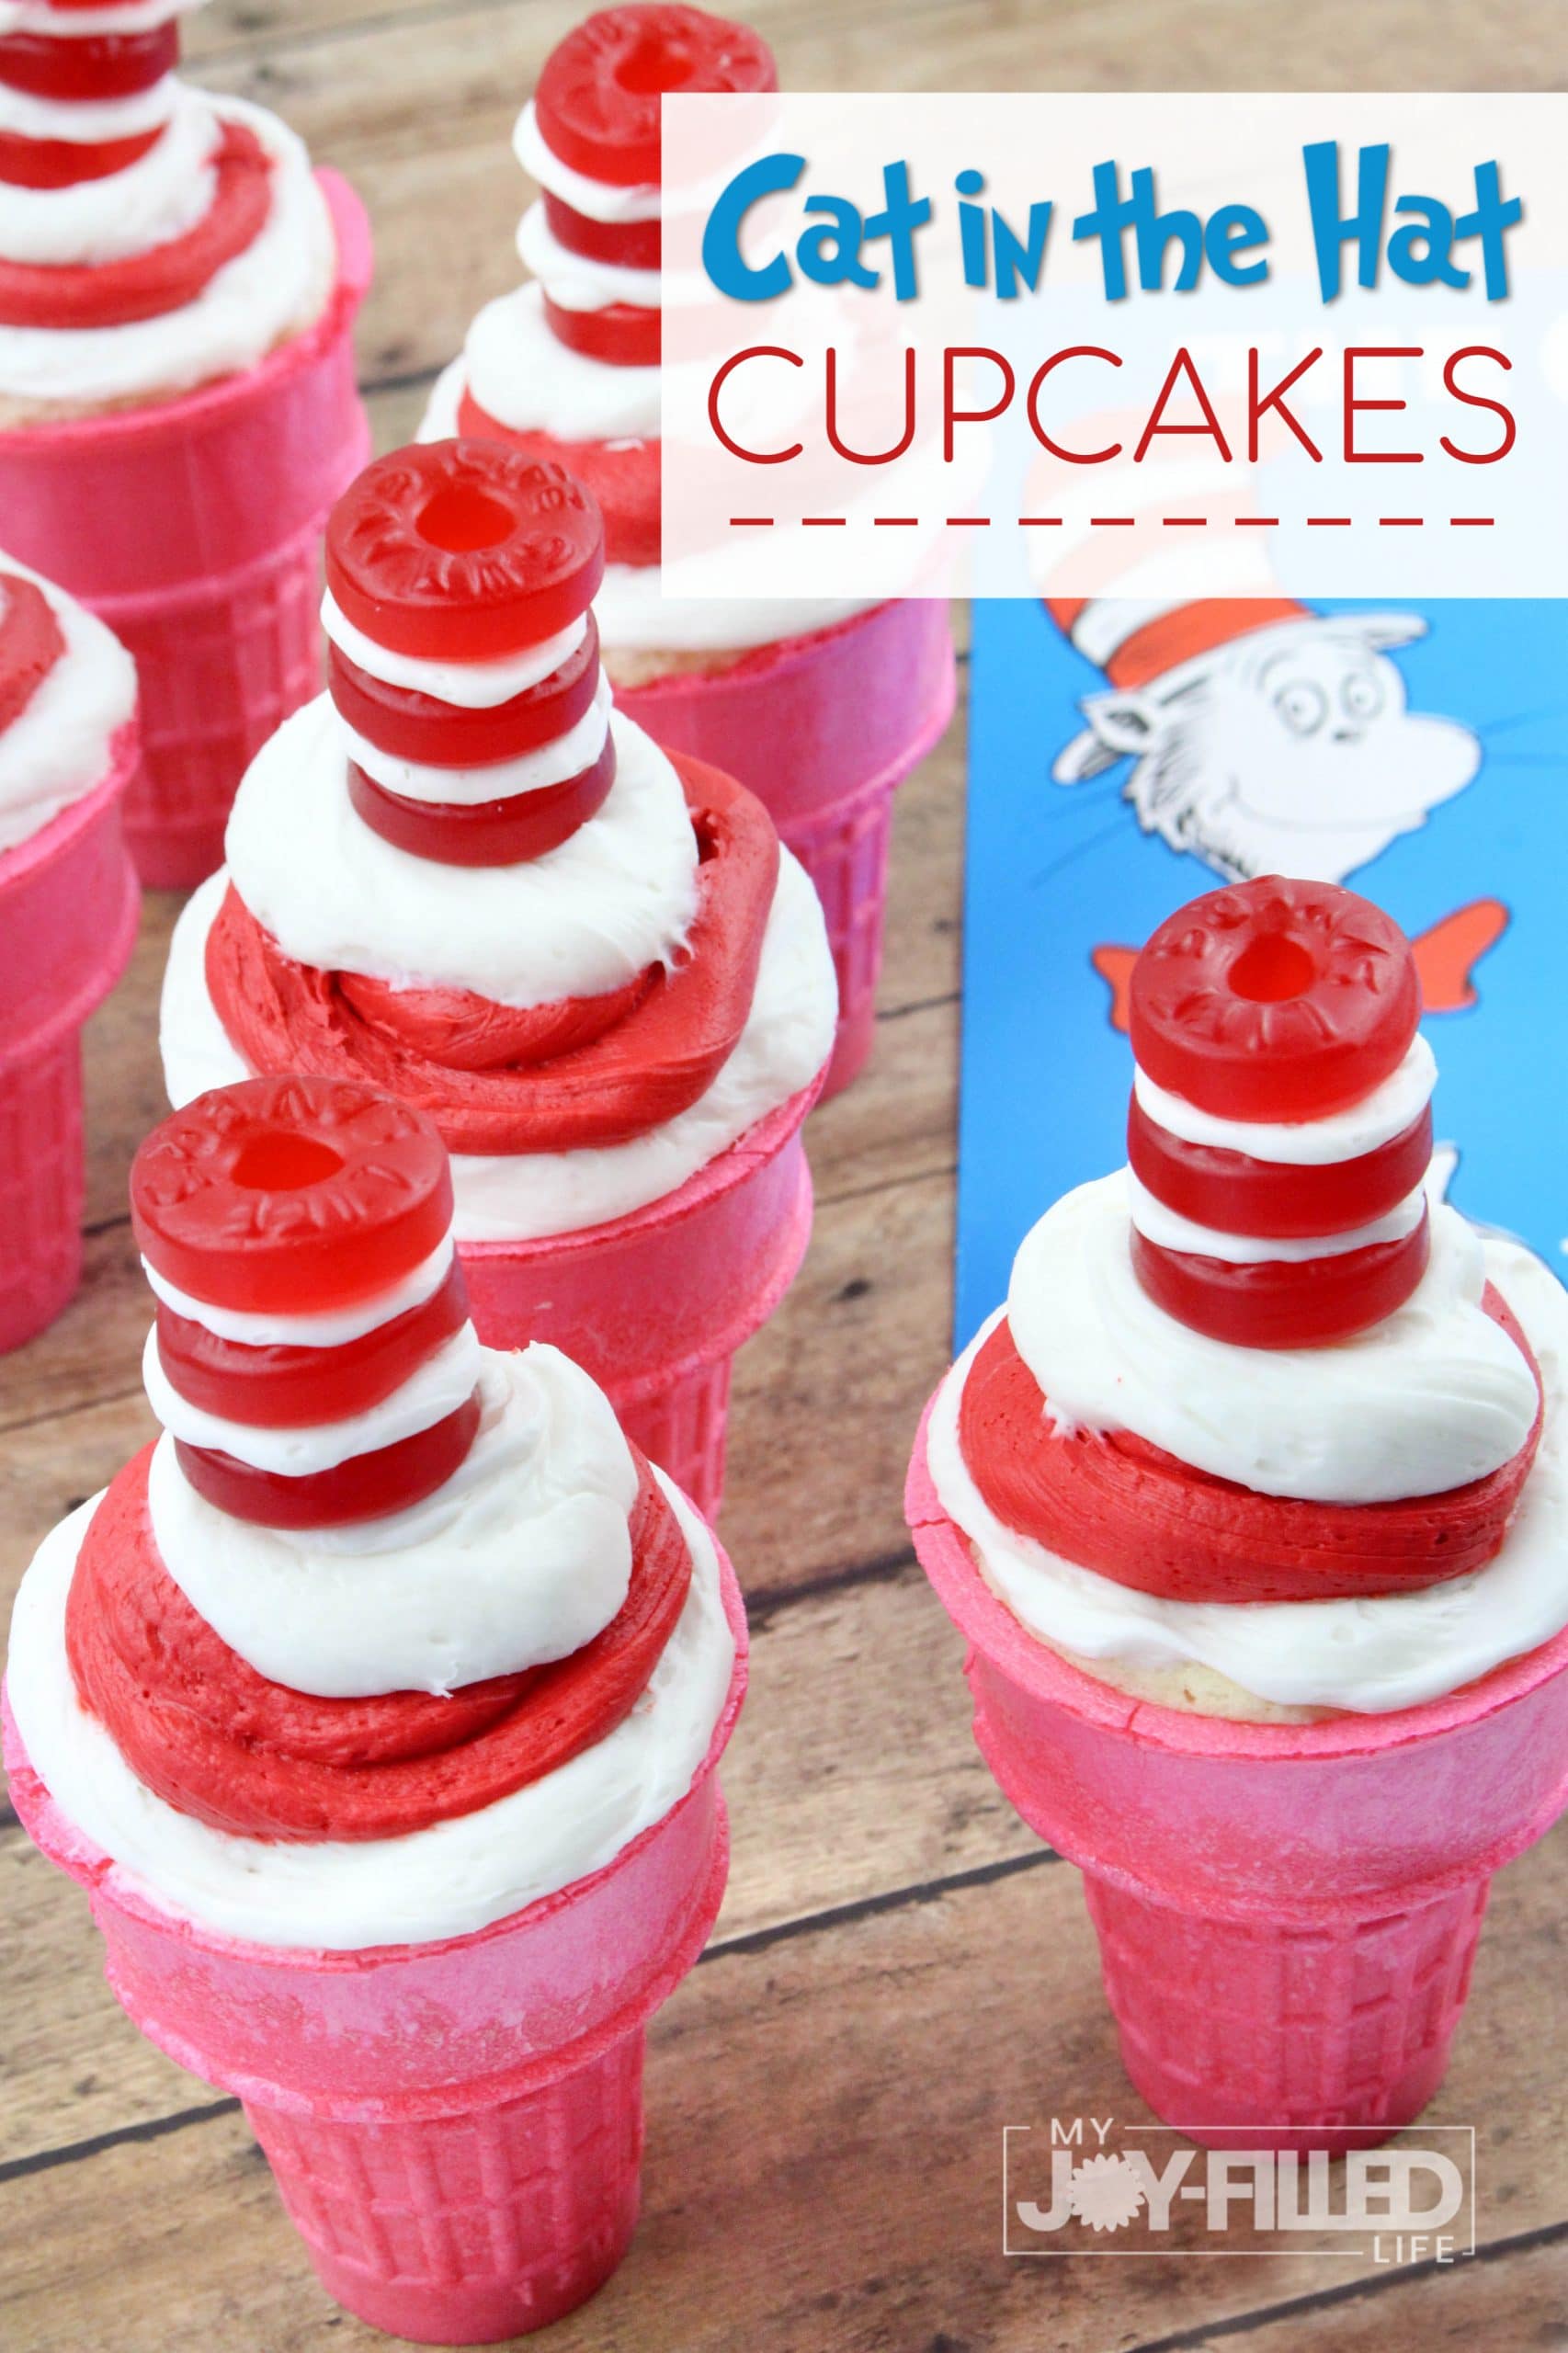 Cupcakes made in ice cream cones and deocrated to look like the hat from Dr. Seuss' The Cat in the Hat